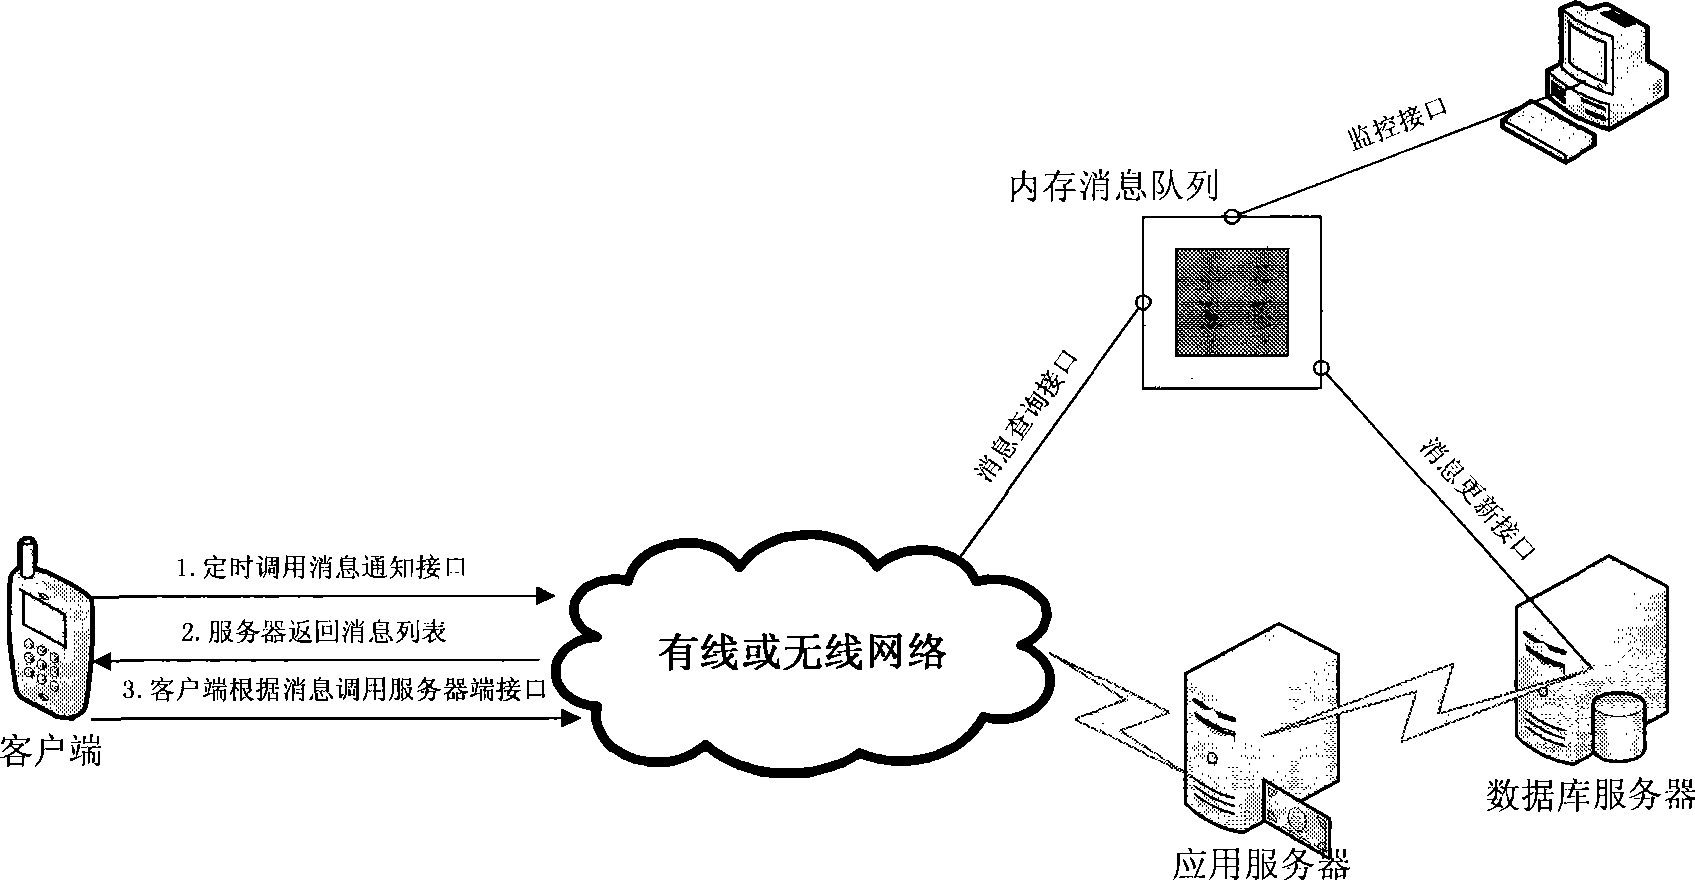 Method for implementing notification through cache